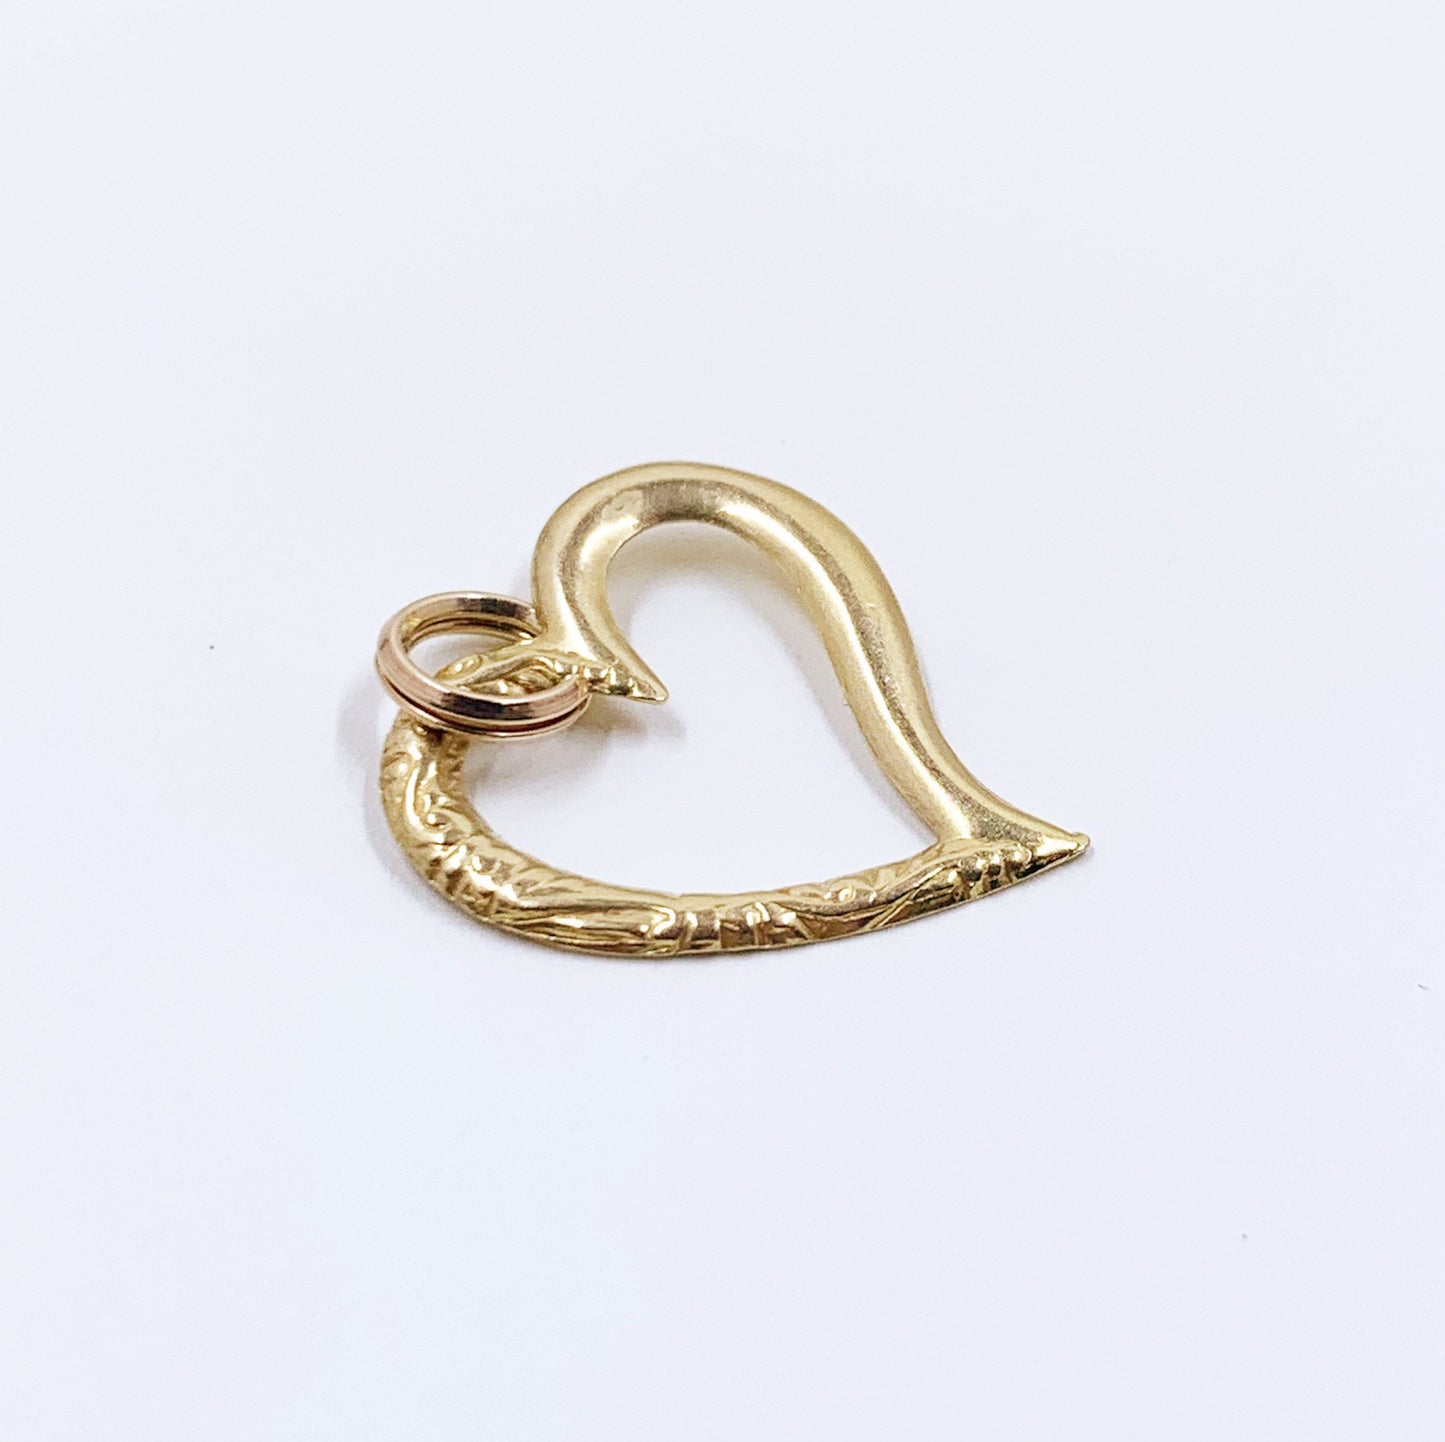 Vintage 14K Repousse Witch's Heart Charm | 14K Yellow Flat Heart Charm | 14K Open Heart Charm